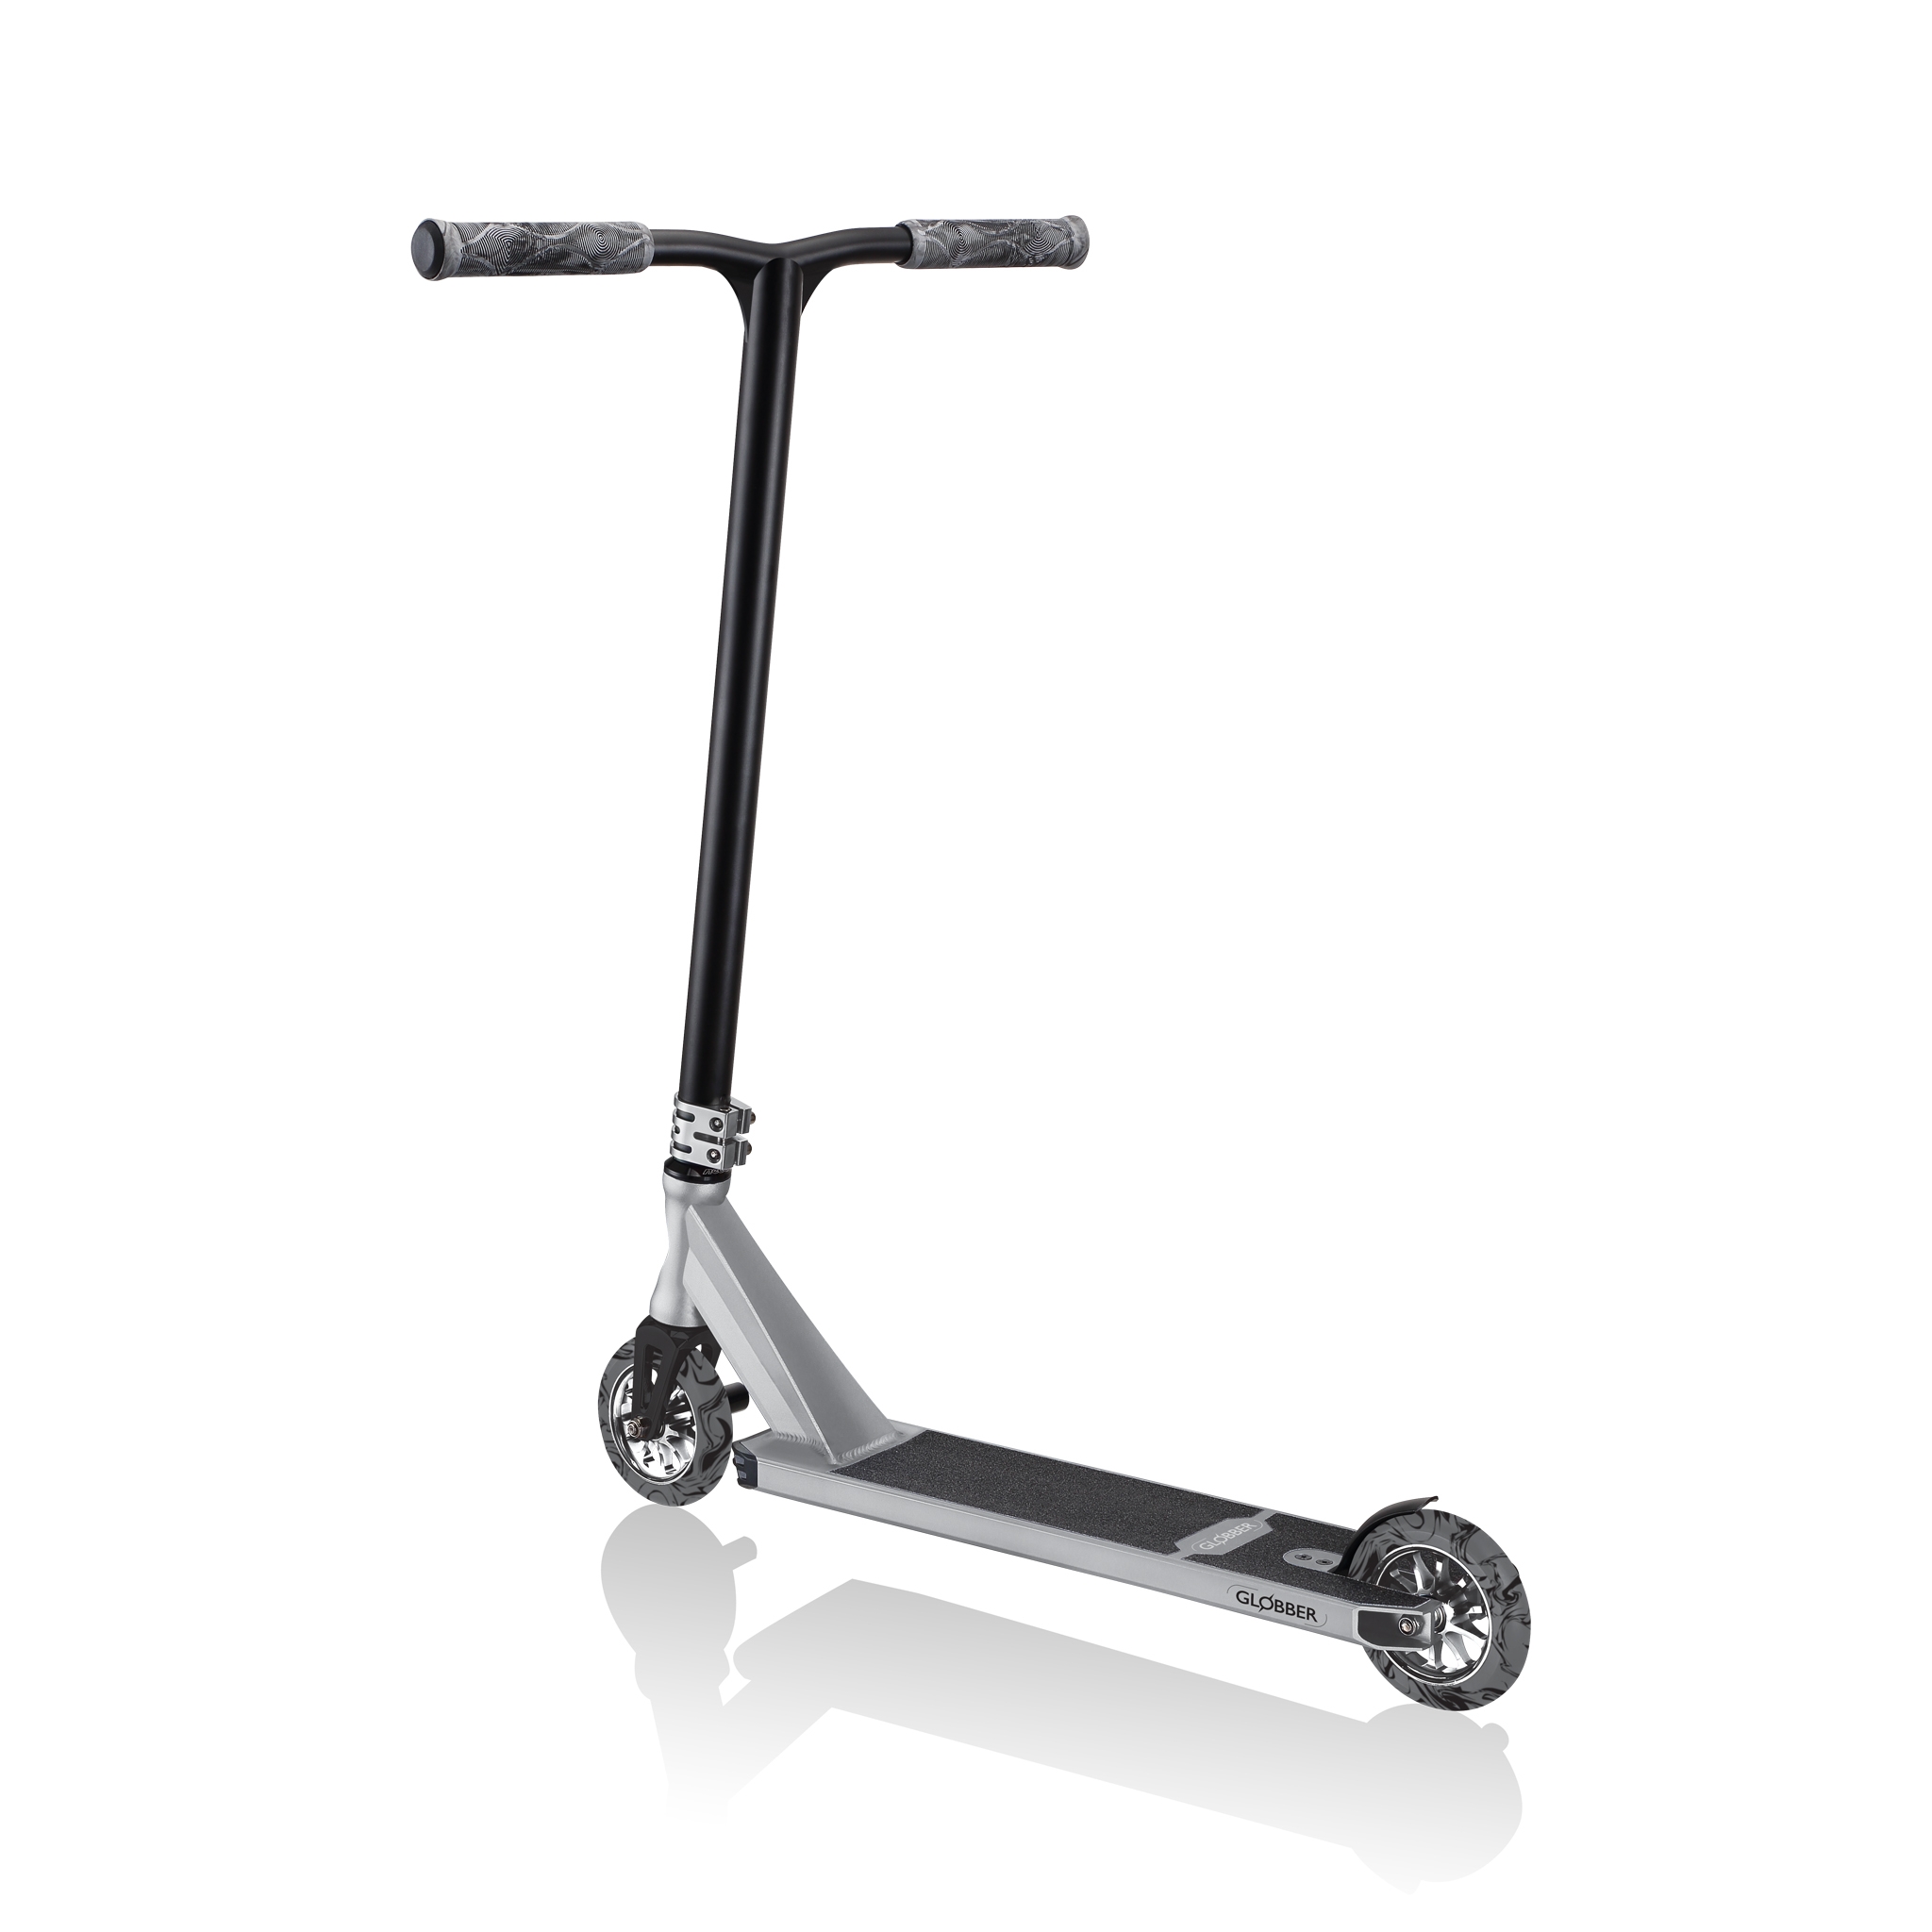 long-and-wide-stunt-scooter-t-bar-Globber-GS900 3